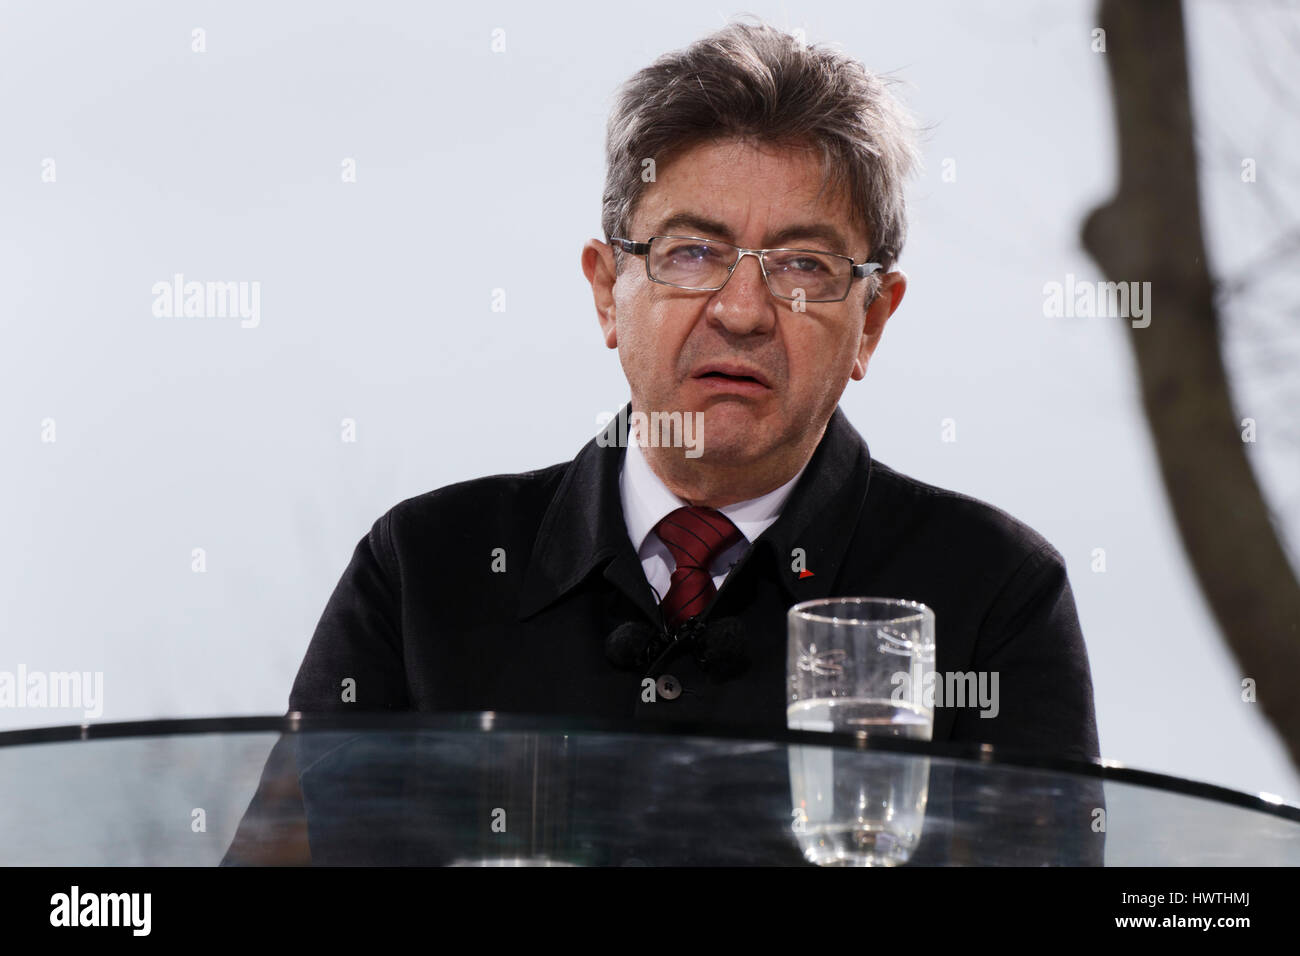 Paris, France. 18th March, 2017. Speech by Jean-Luc Melenchon, Presidential Candidate  for the 6 th Republic in Paris, France. Stock Photo